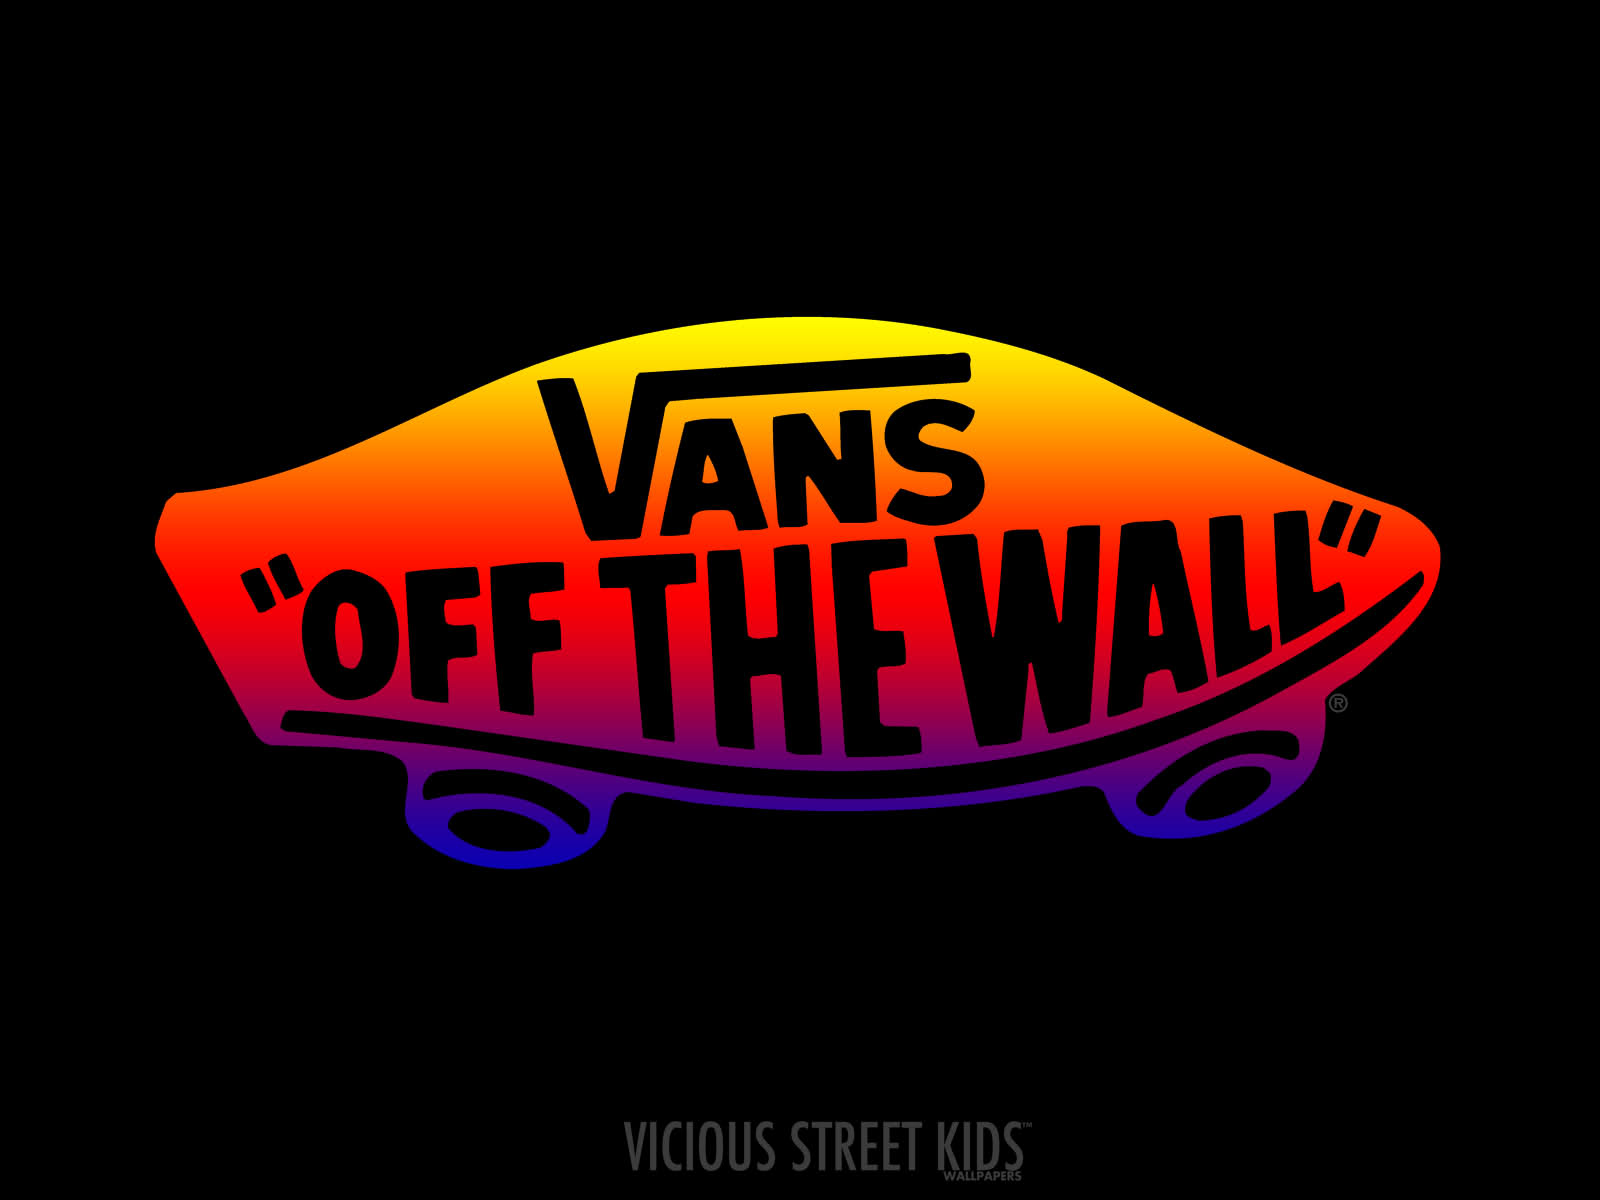 74+] Vans Off The Wall Wallpaper on 